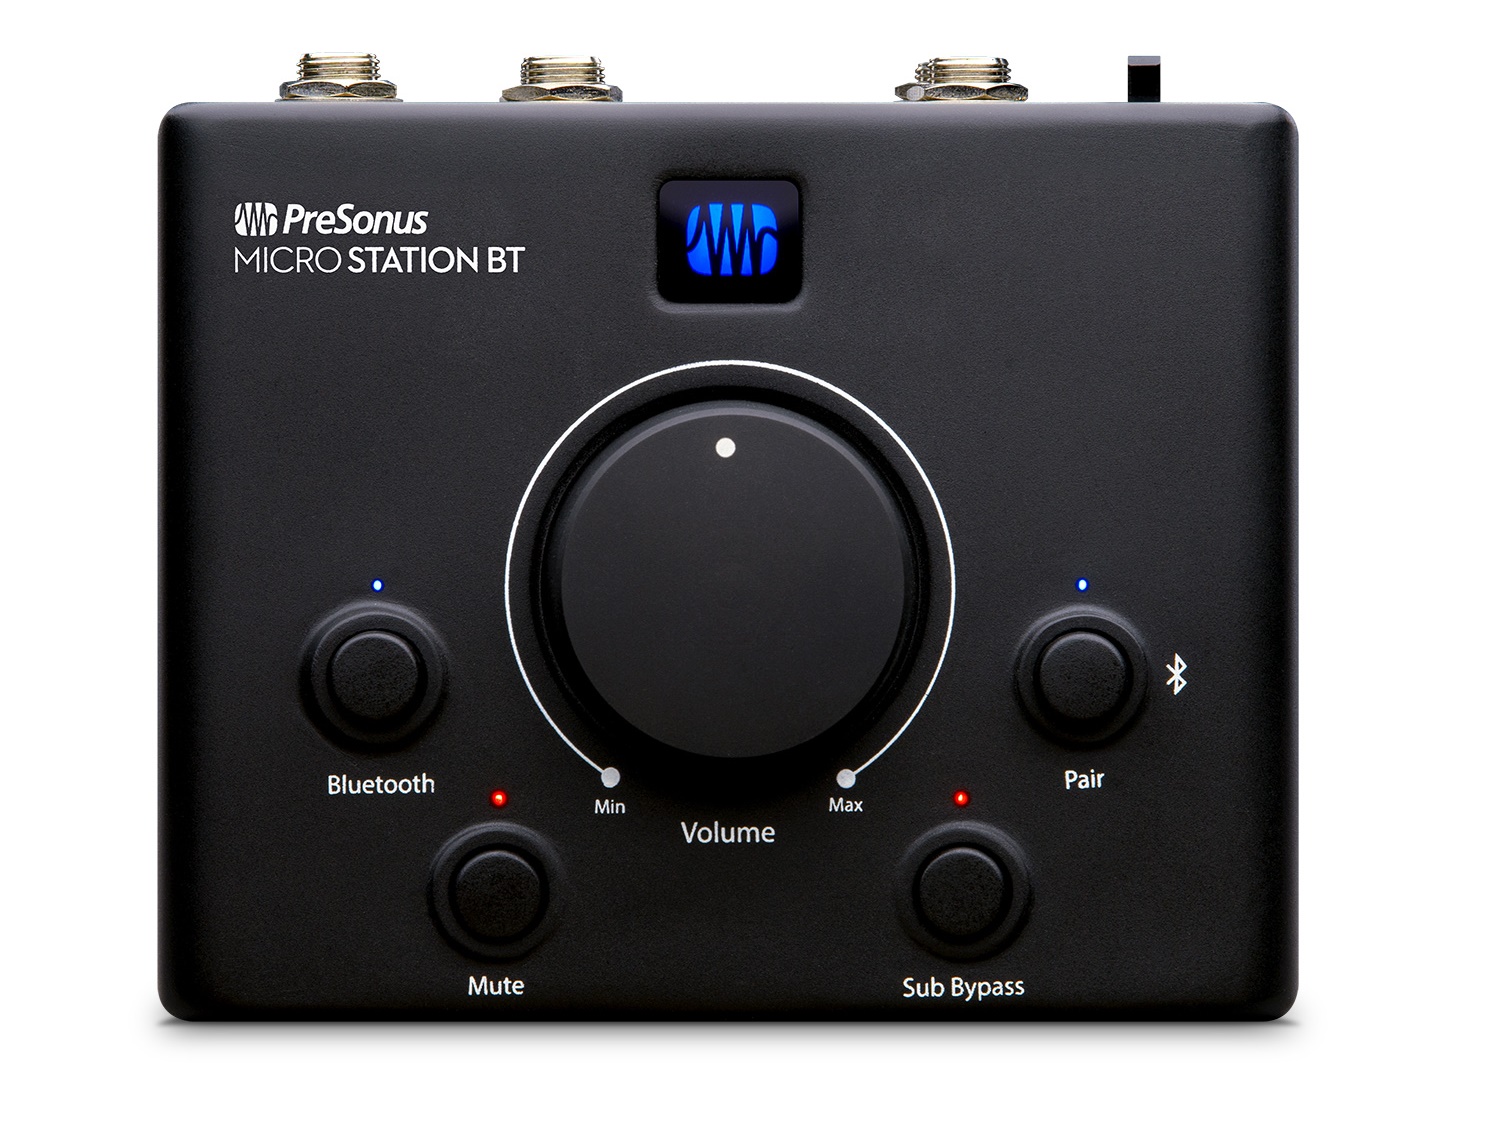 MicroStation BT Microstation BT 2.1 Monitor Controller with Bluetooth Connectivity (Black) by PreSonus